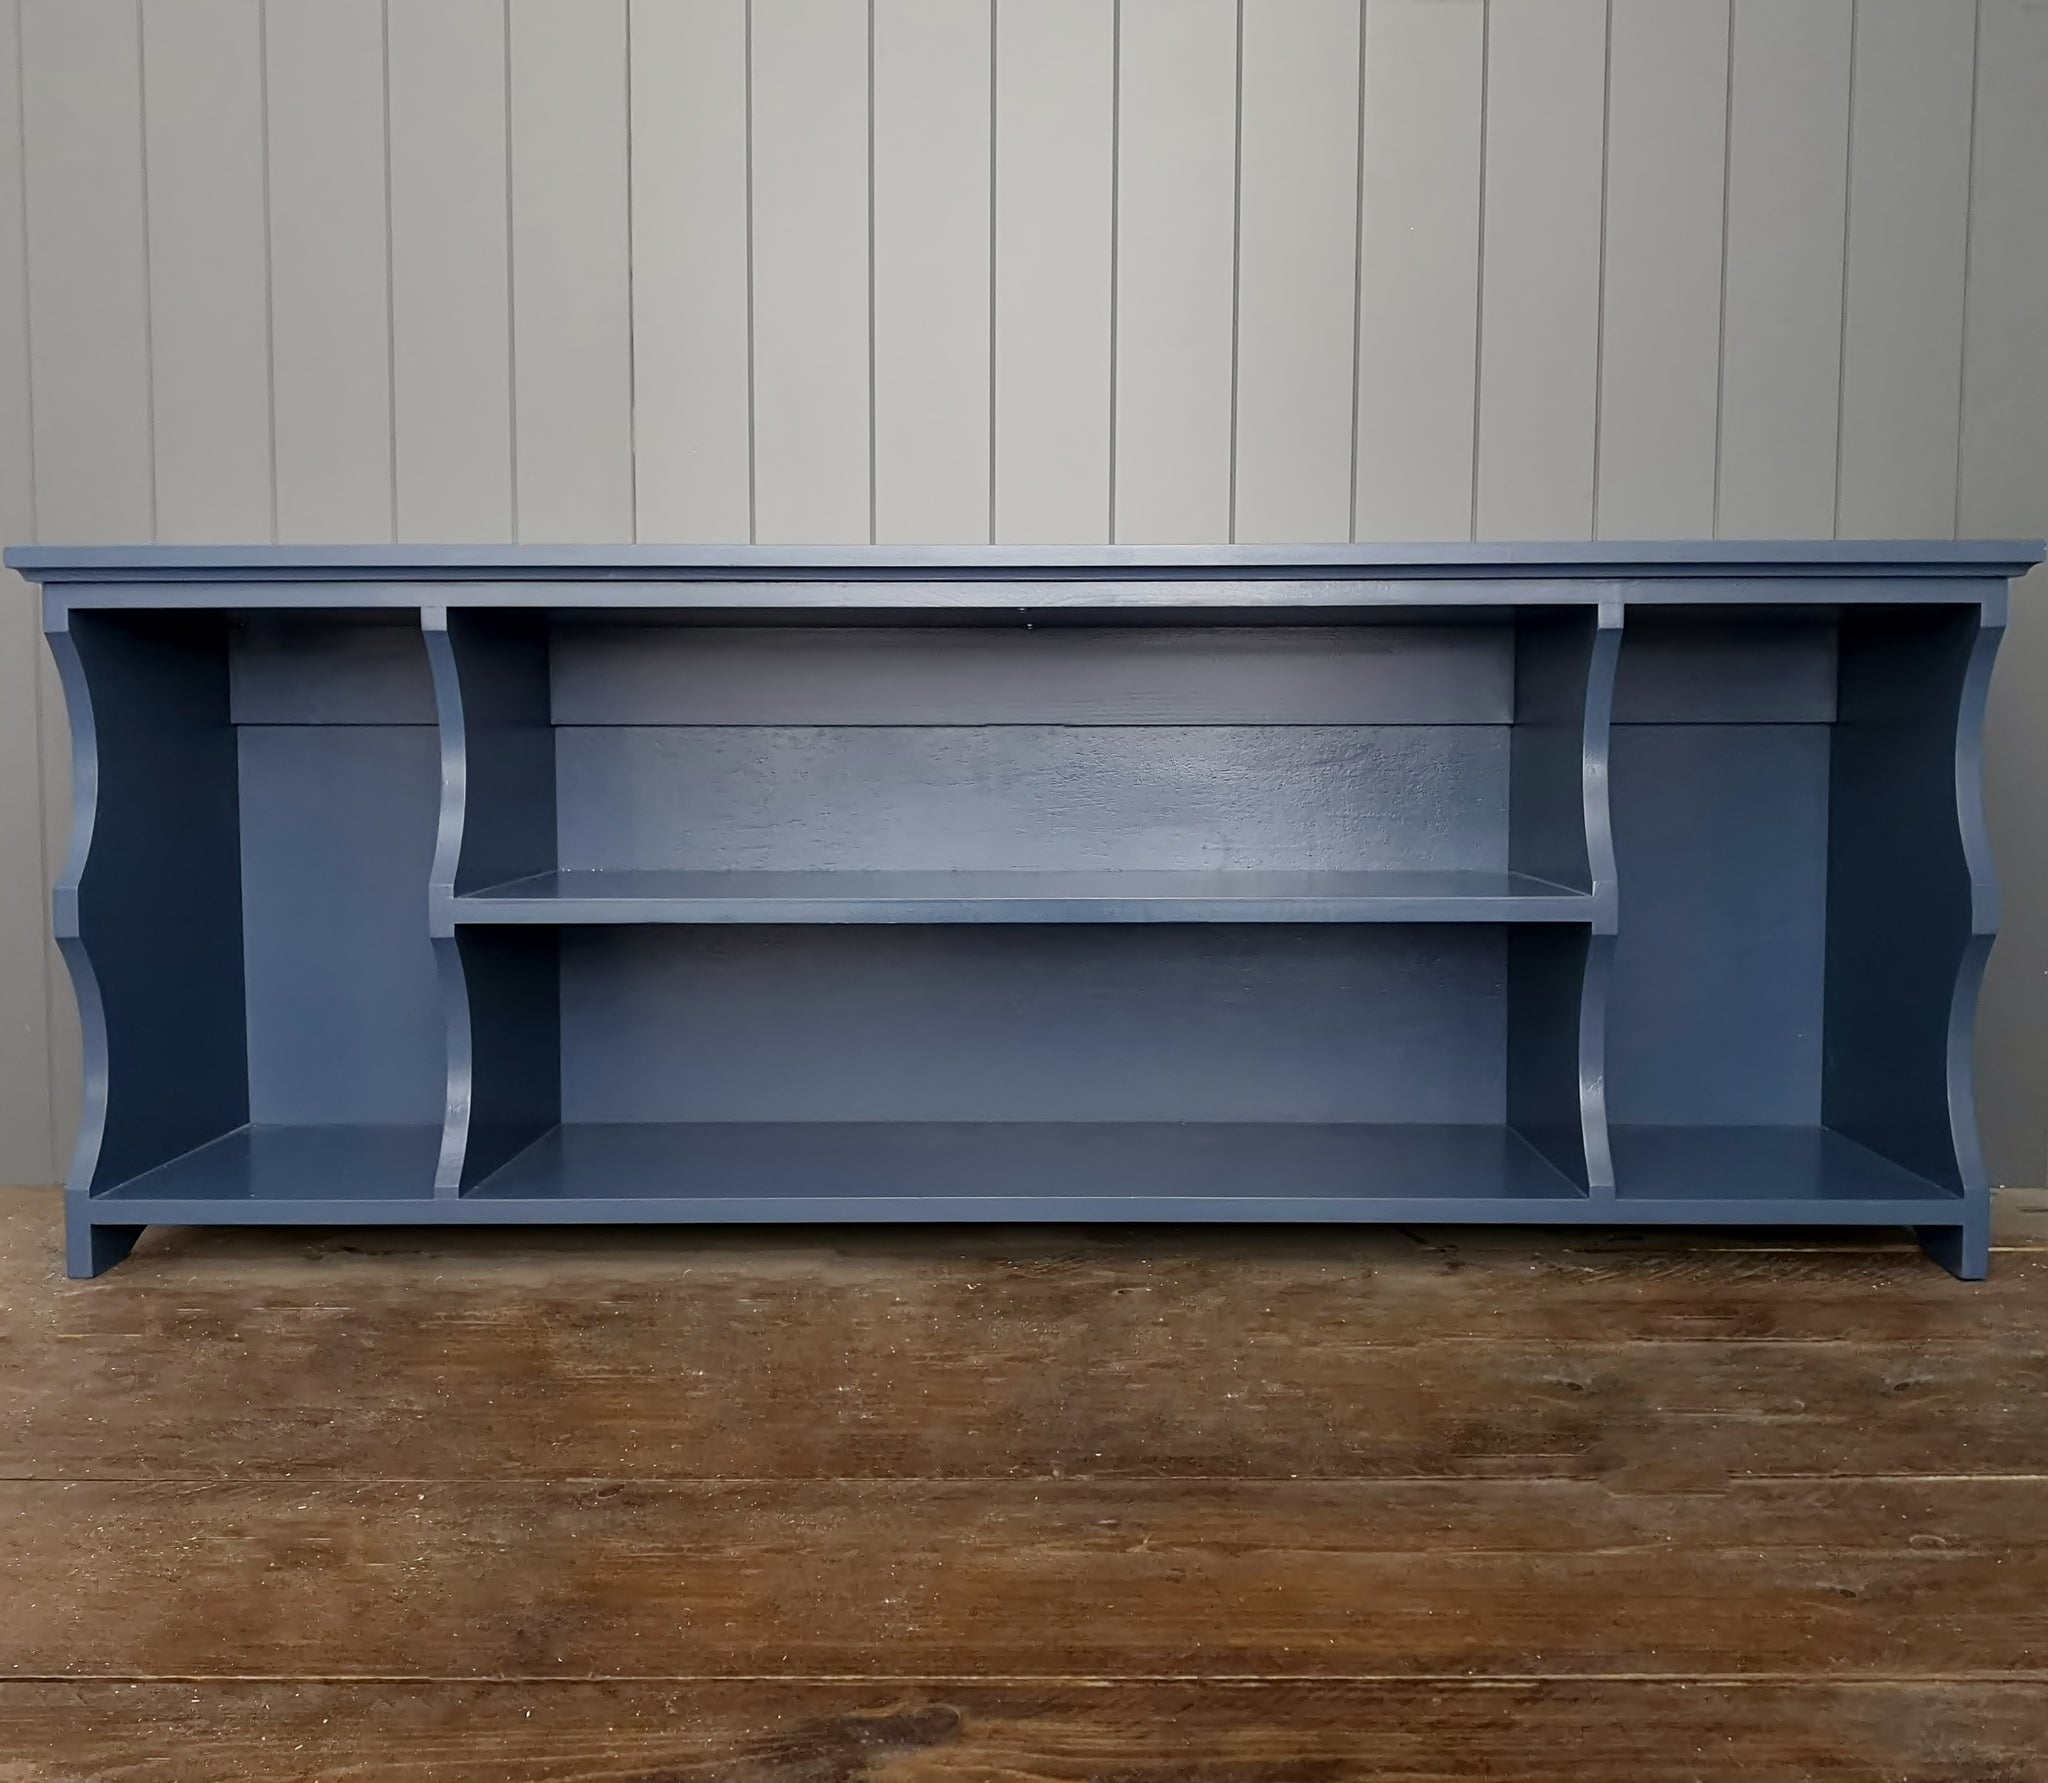 Funky painted hallway bench.  Dark blue boot and shoe storage